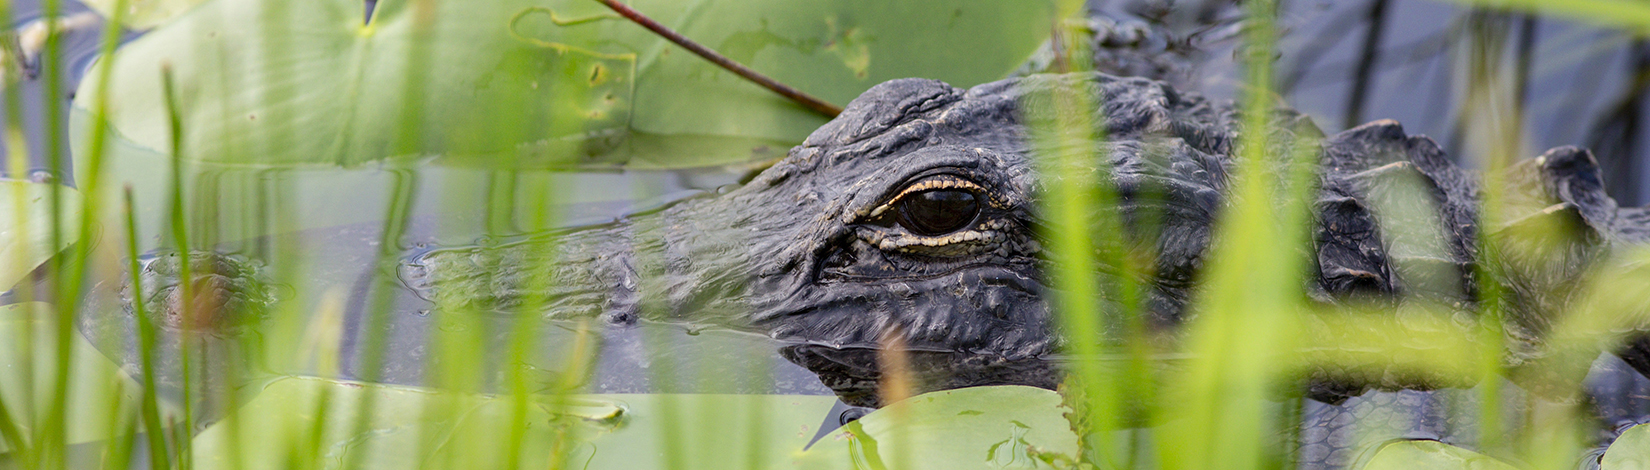 a gator in the grassy water